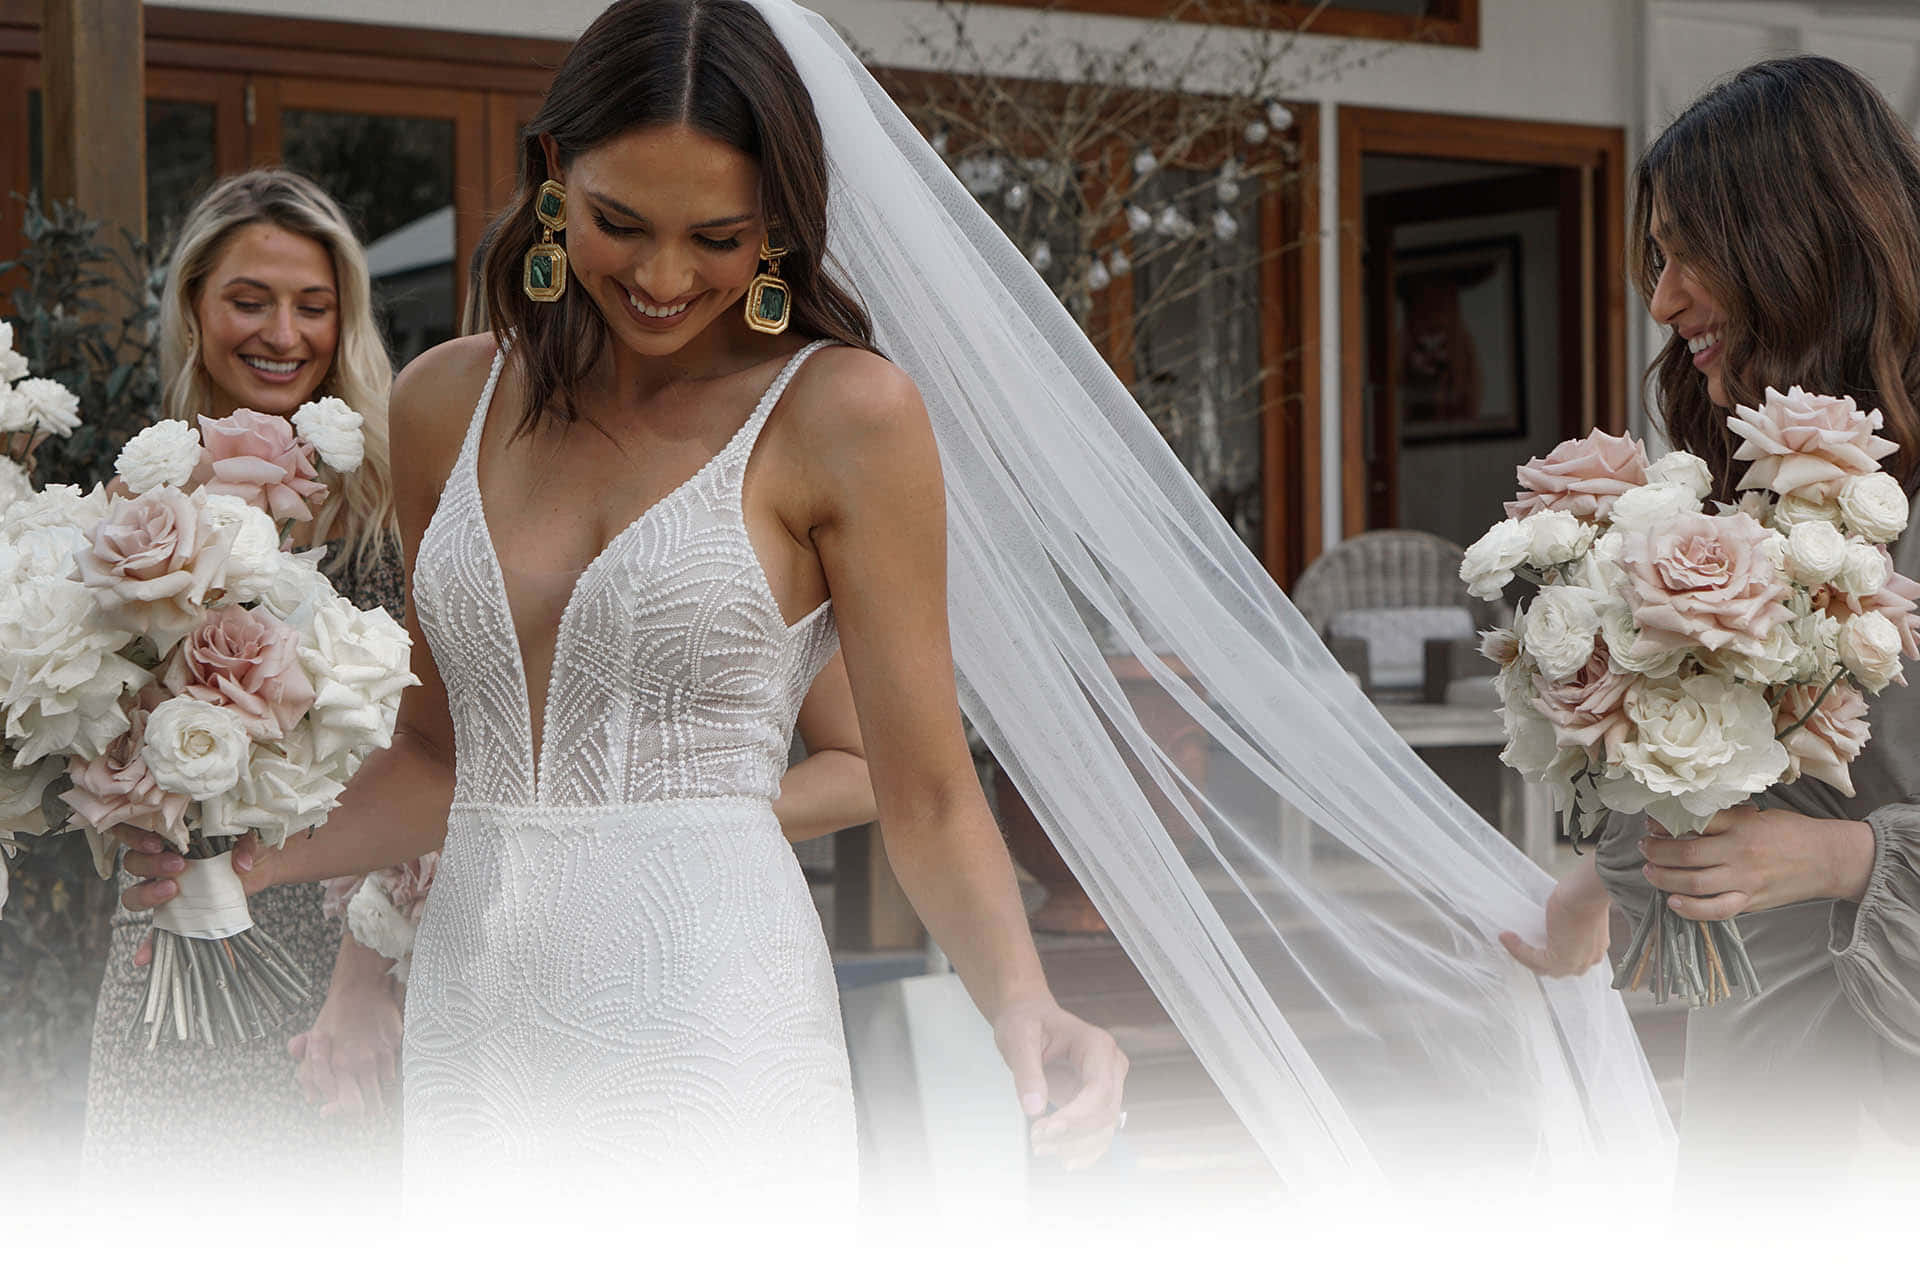 A gorgeous bride in a stunning dress on her special day Wallpaper